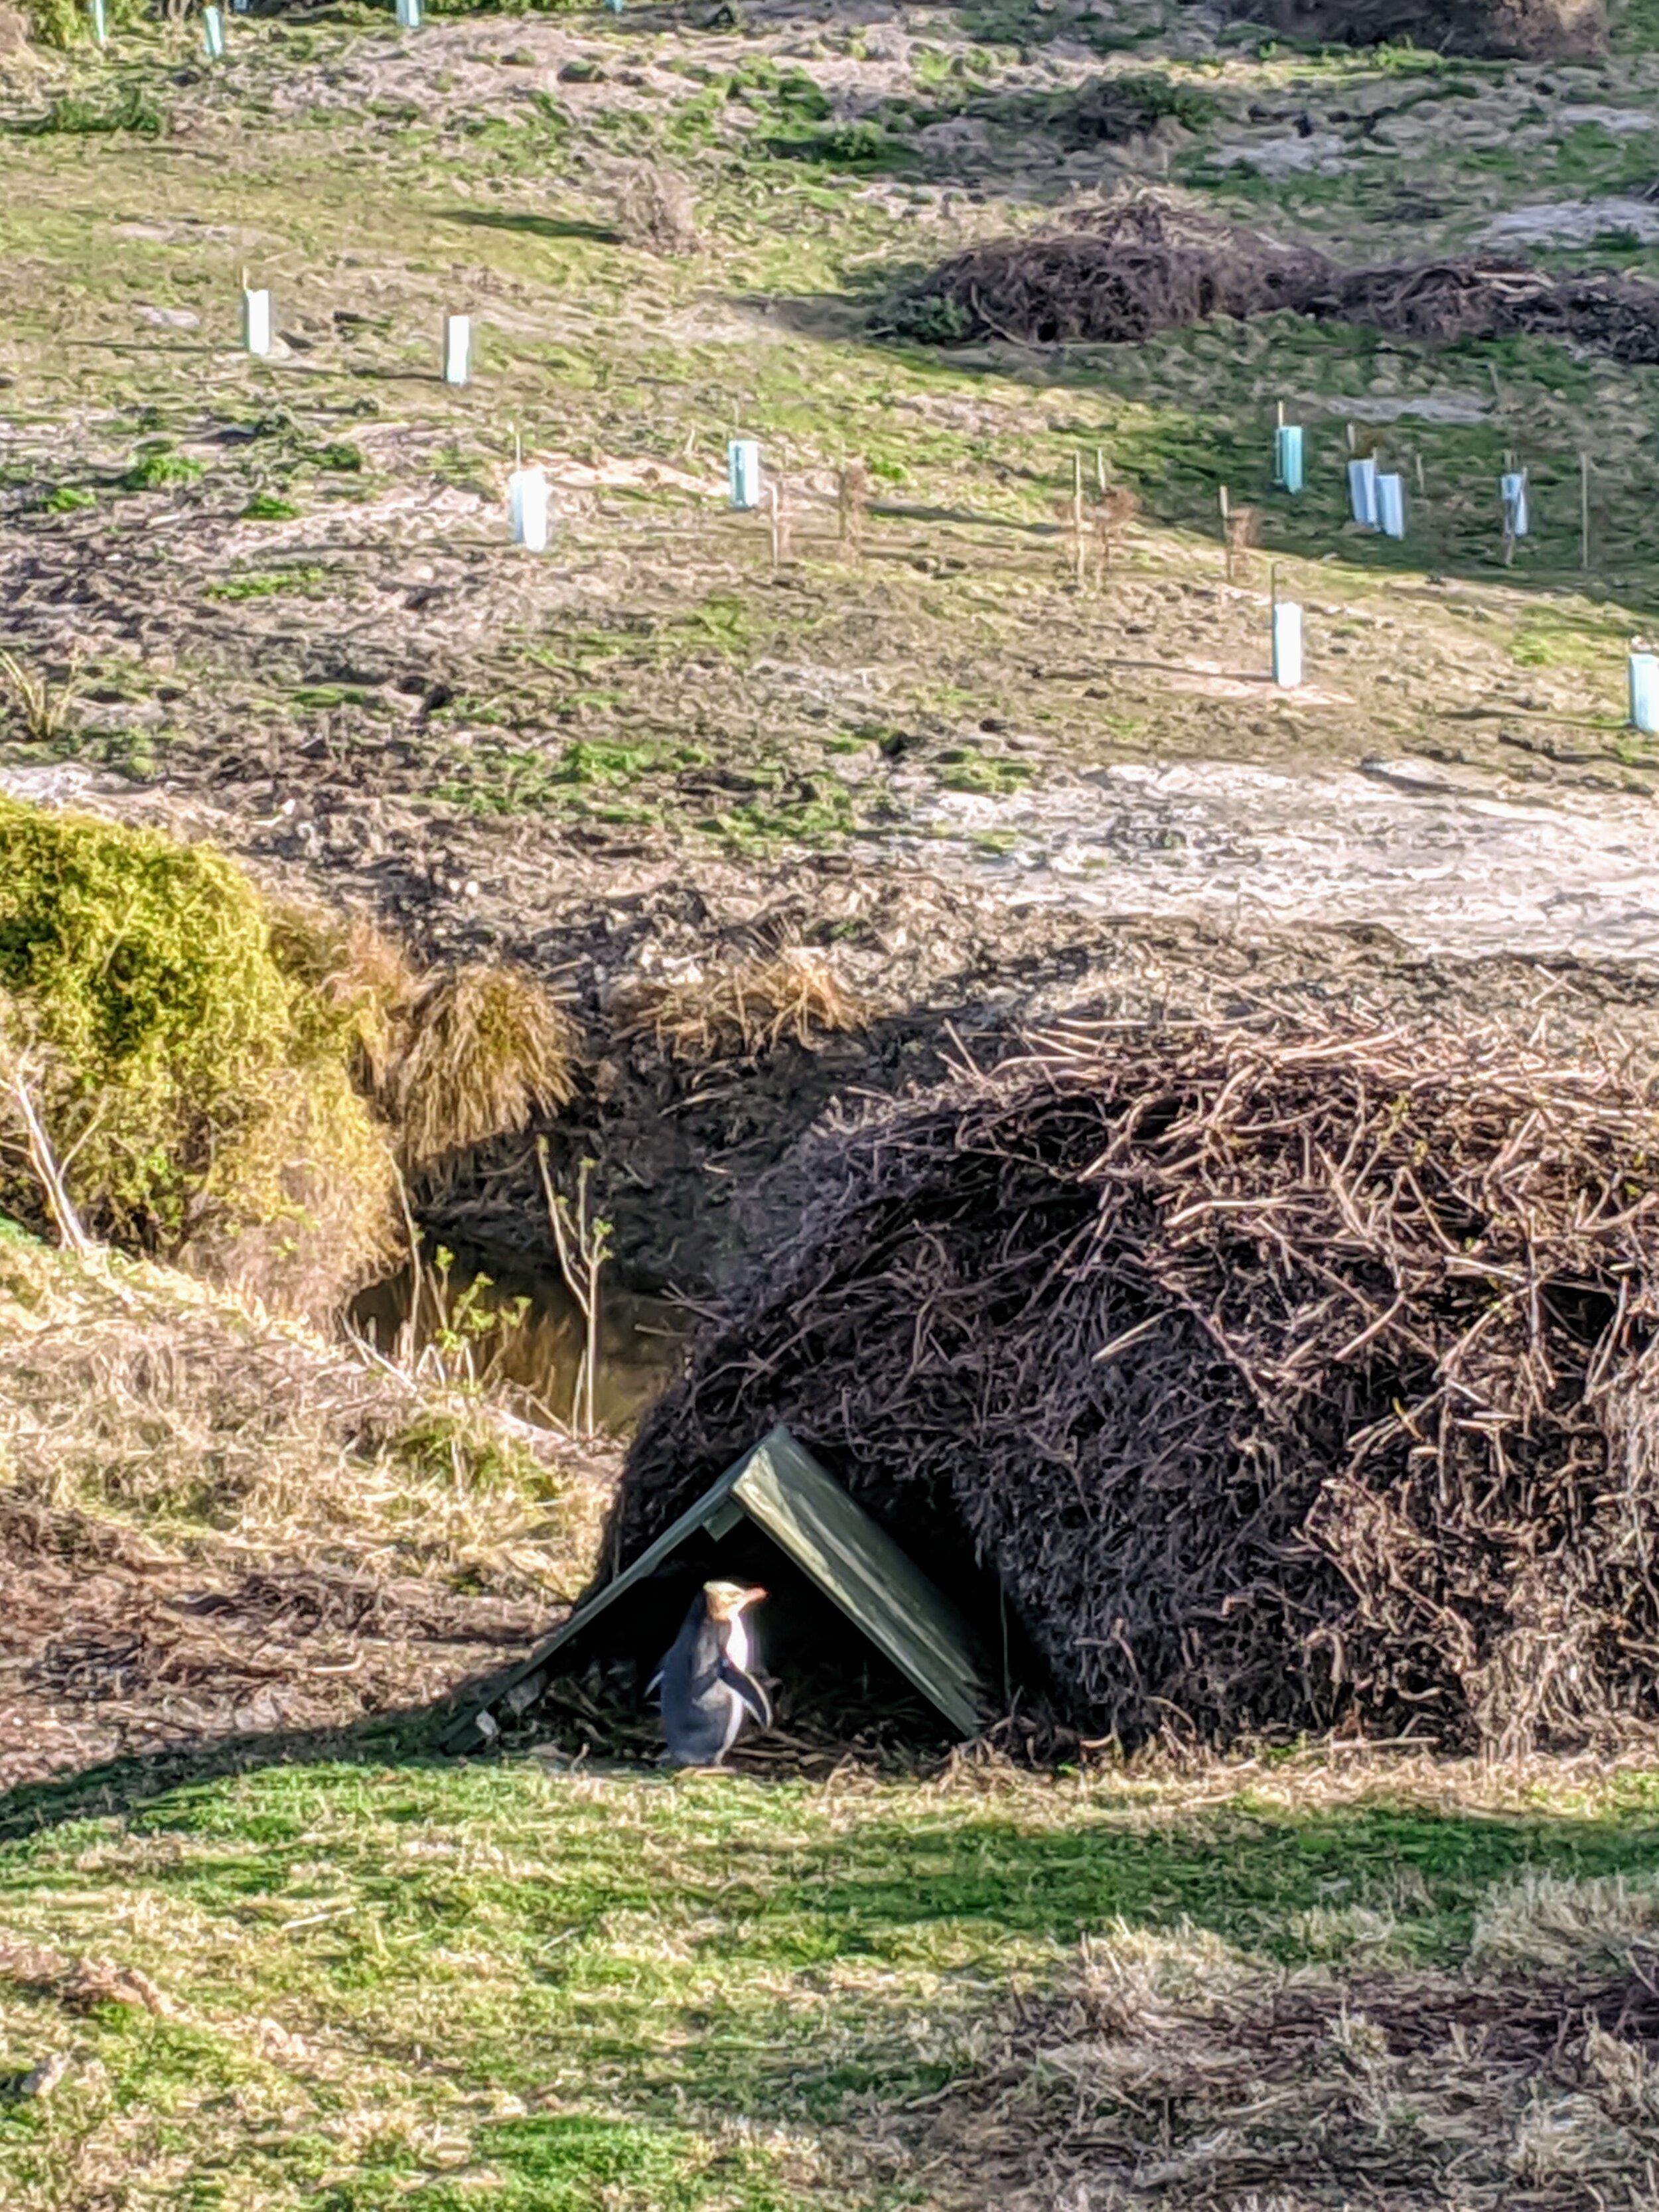  Male yellow-eyed penguin standing guard outside a nesting hut while his mate rests inside. 